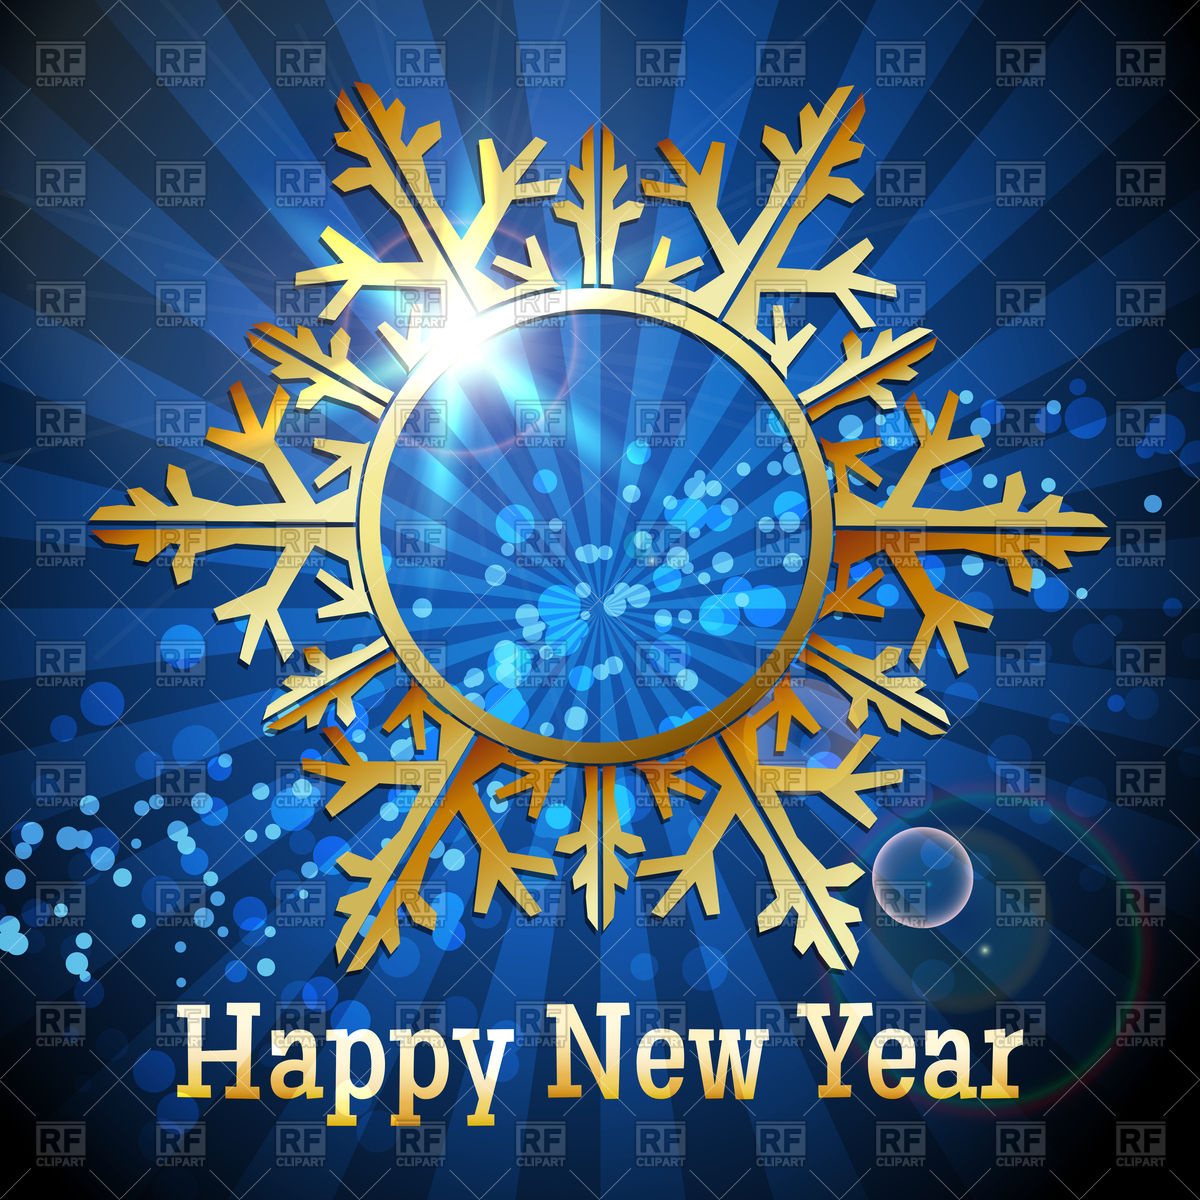 Golden Snowflake Happy New Year Background Vector Image Of